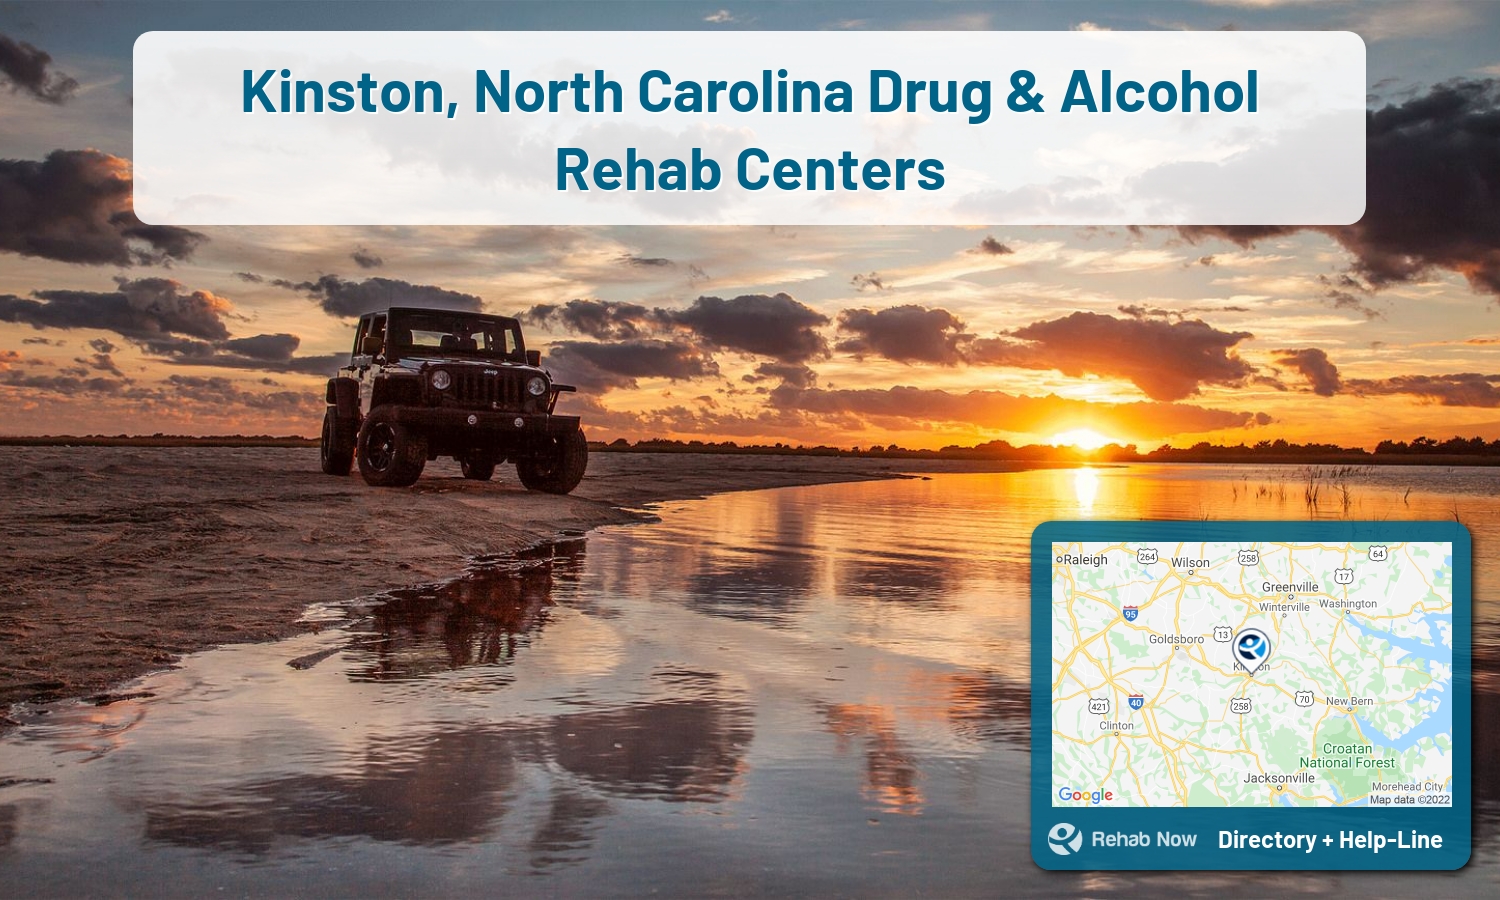 Our experts can help you find treatment now in Kinston, North Carolina. We list drug rehab and alcohol centers in North Carolina.